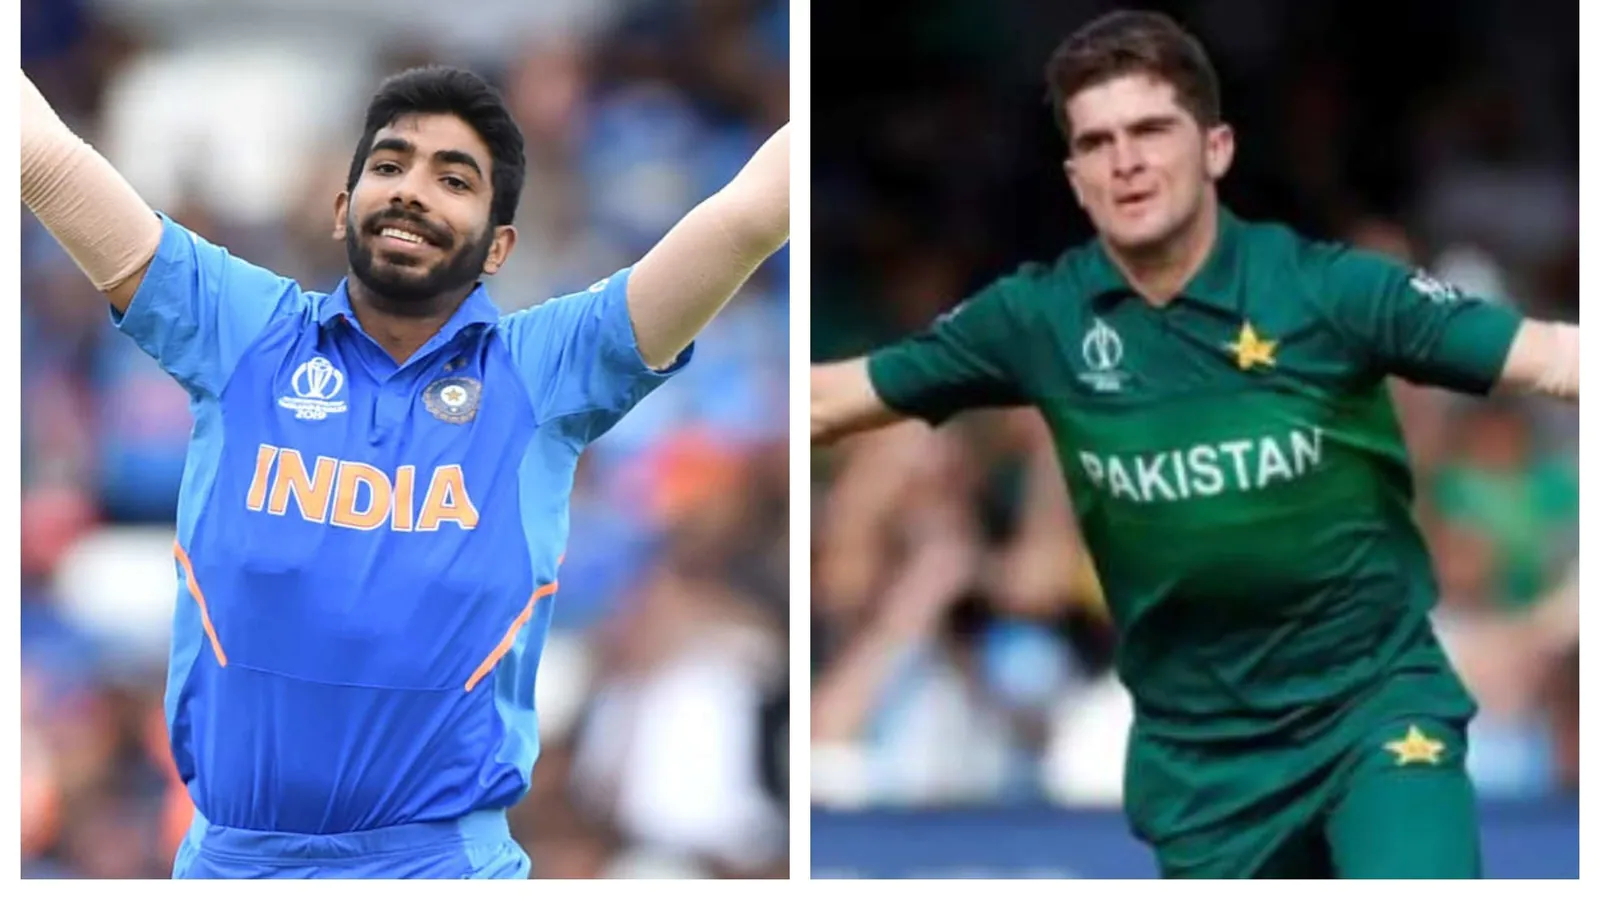 Jasprit Bumrah and Shaheen Afridi. Photo- Getty